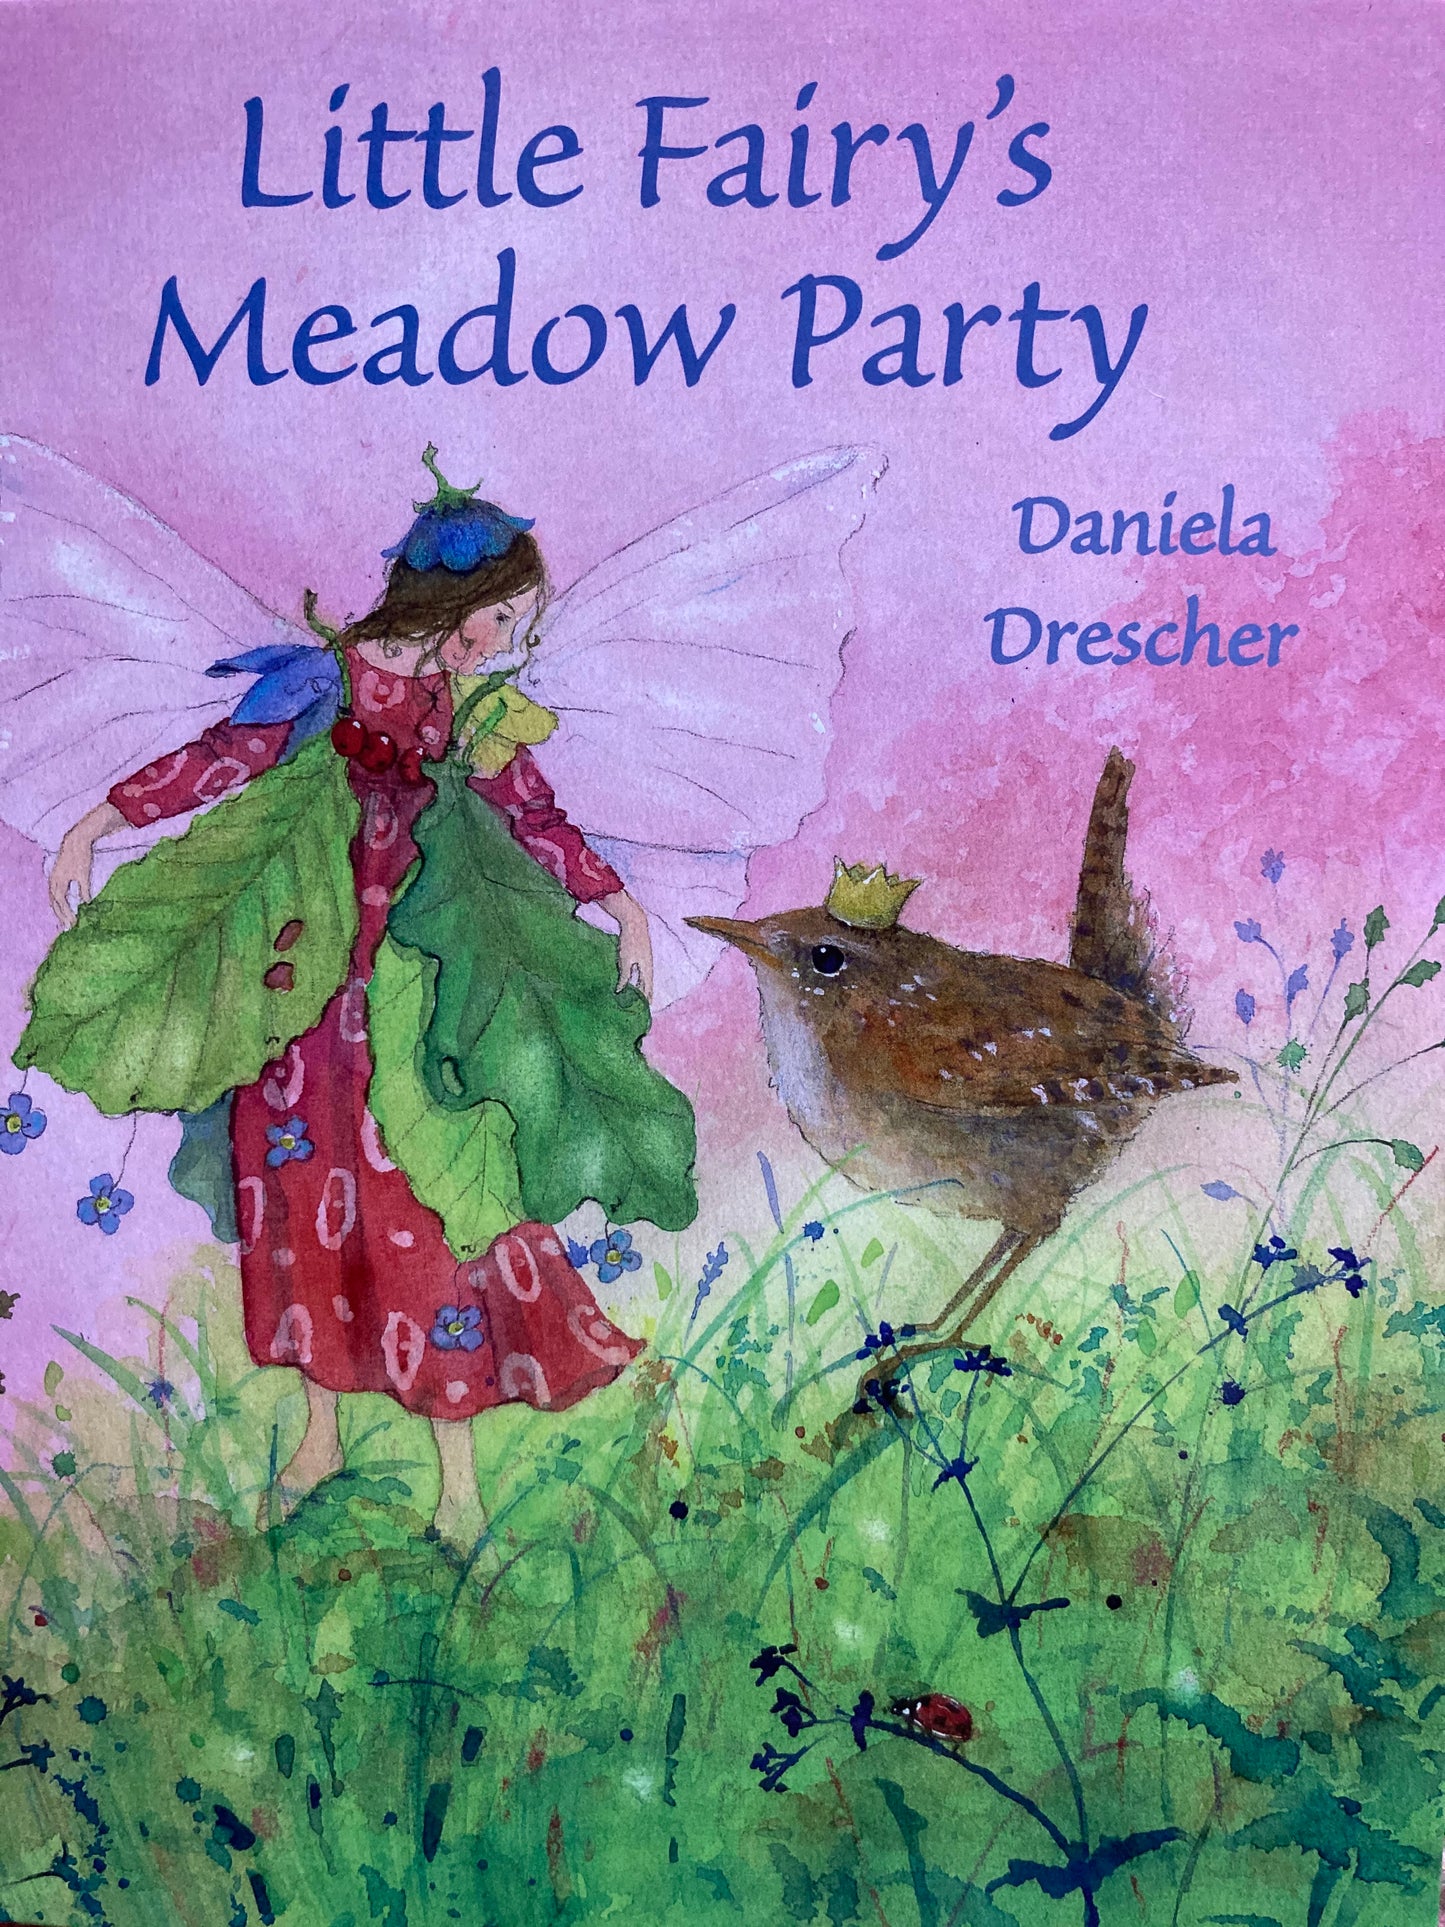 Children's Picture Book - LITTLE FAIRY'S MEADOW PARTY